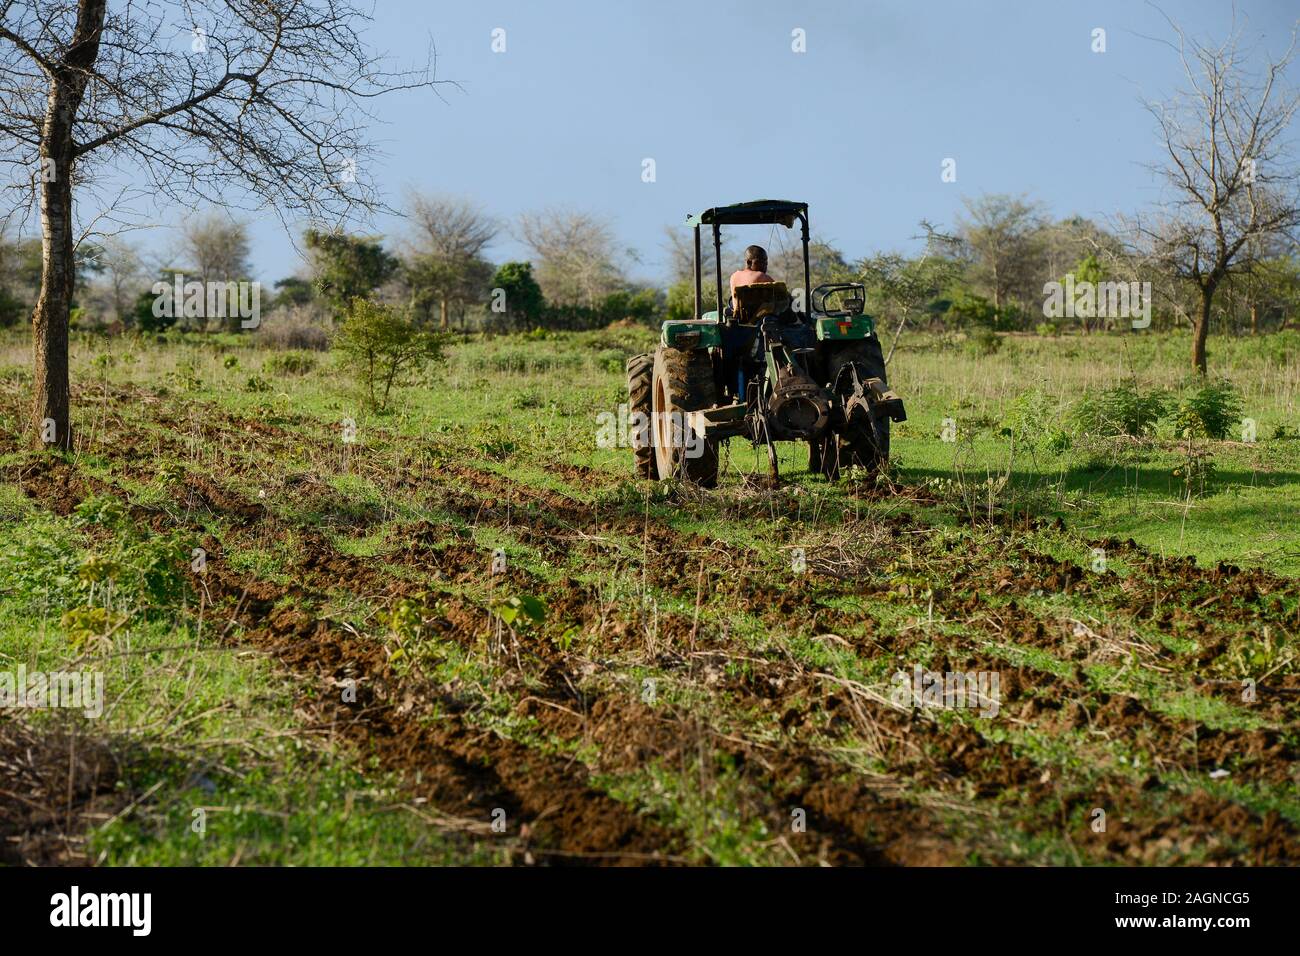 ZAMBIA, Mazabuka, medium scale farmer practise conservation farming, ripping furrows with John deere Tractor to sow cotton seeds, ripping protects the soil instead of ploughing Stock Photo